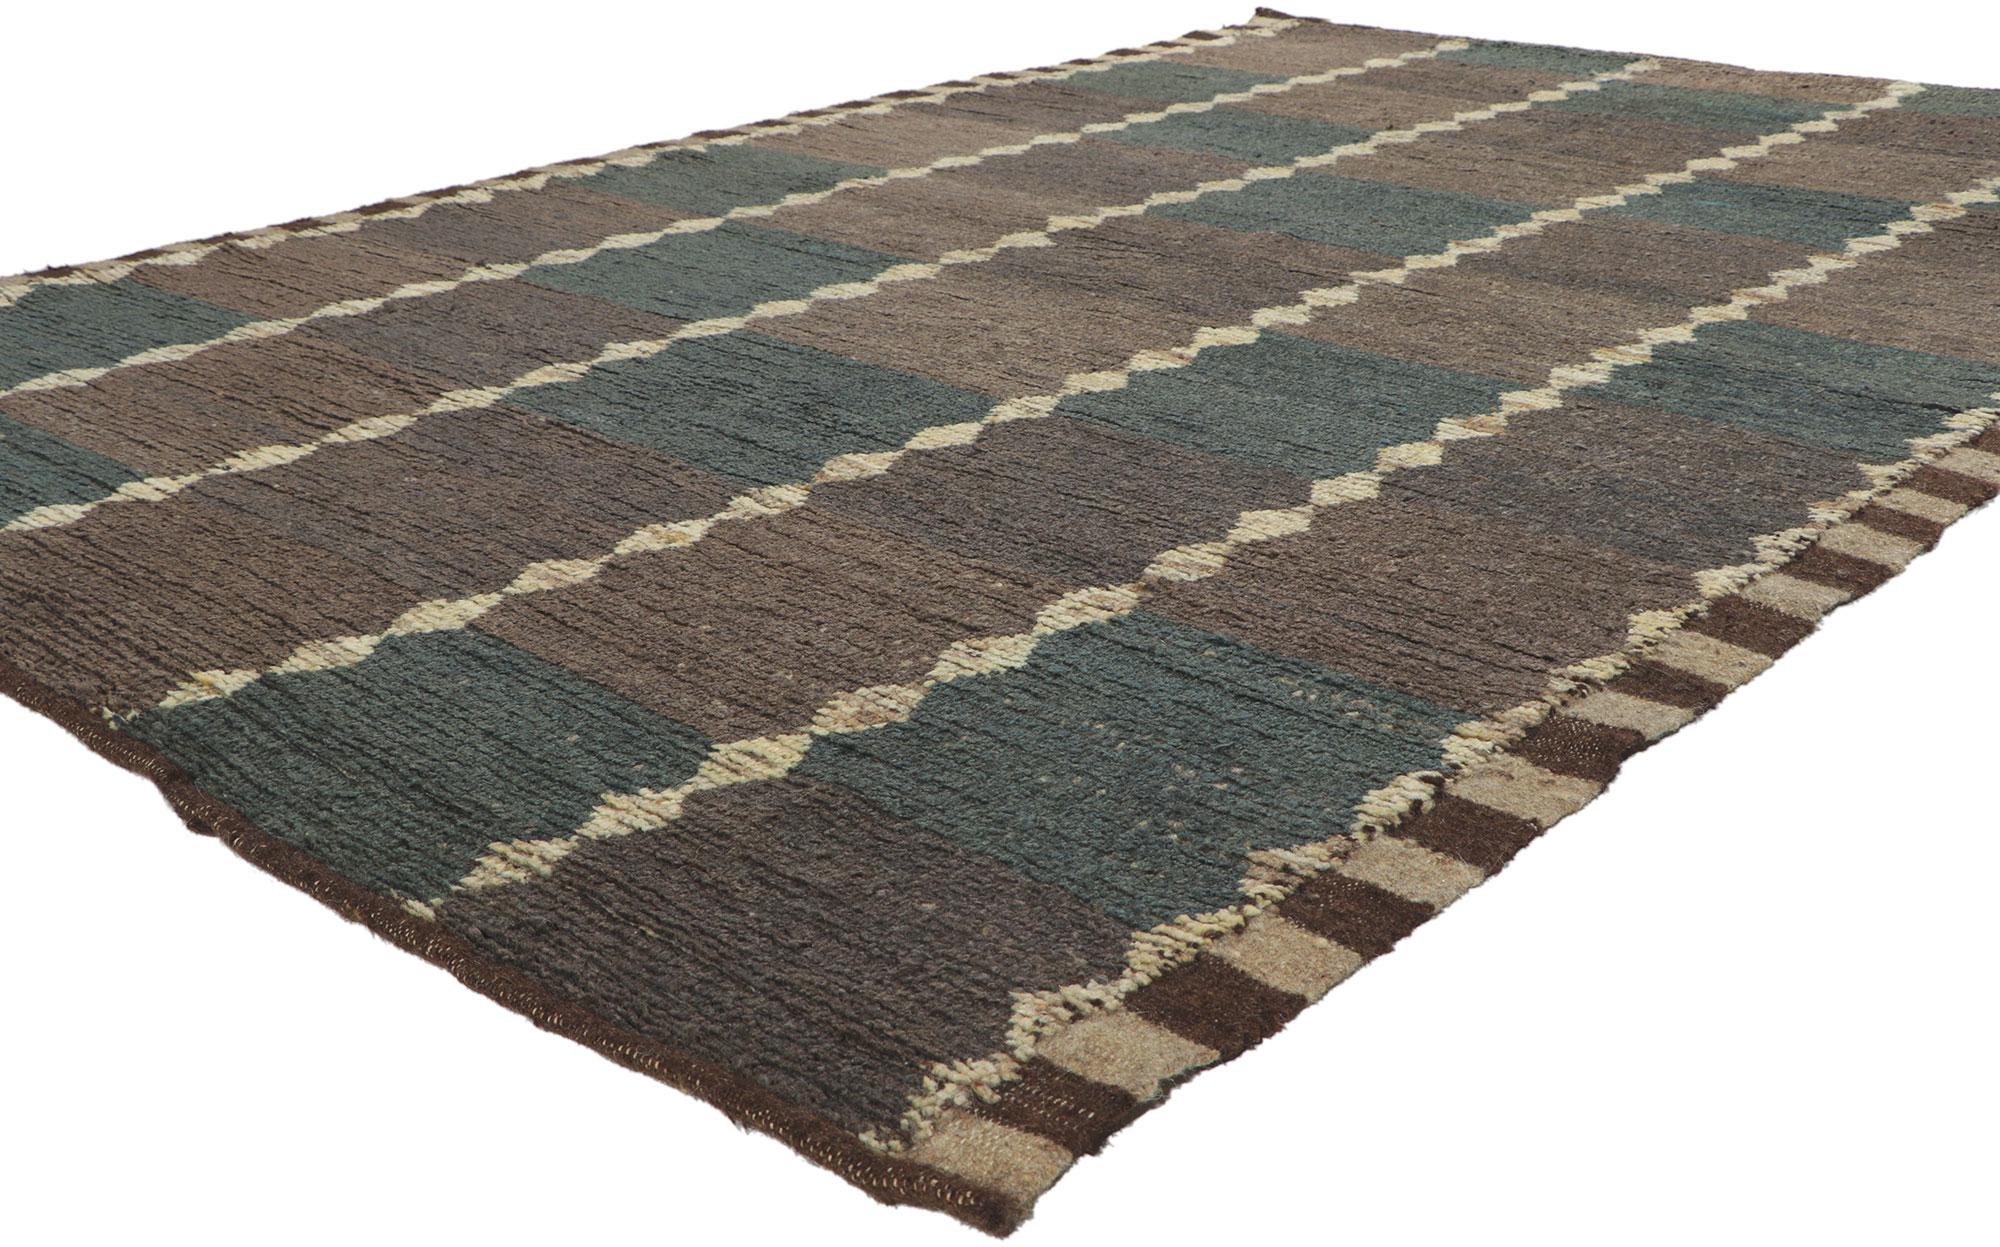 80823 Modern Checkered Moroccan Rug, 06'01 x 08'10.
Masculine appeal meets Midcentury Modern in this hand knotted wool Moroccan style rug. The checkered pattern and dark earth-tone colors woven into this piece provide a feeling of cozy contentment